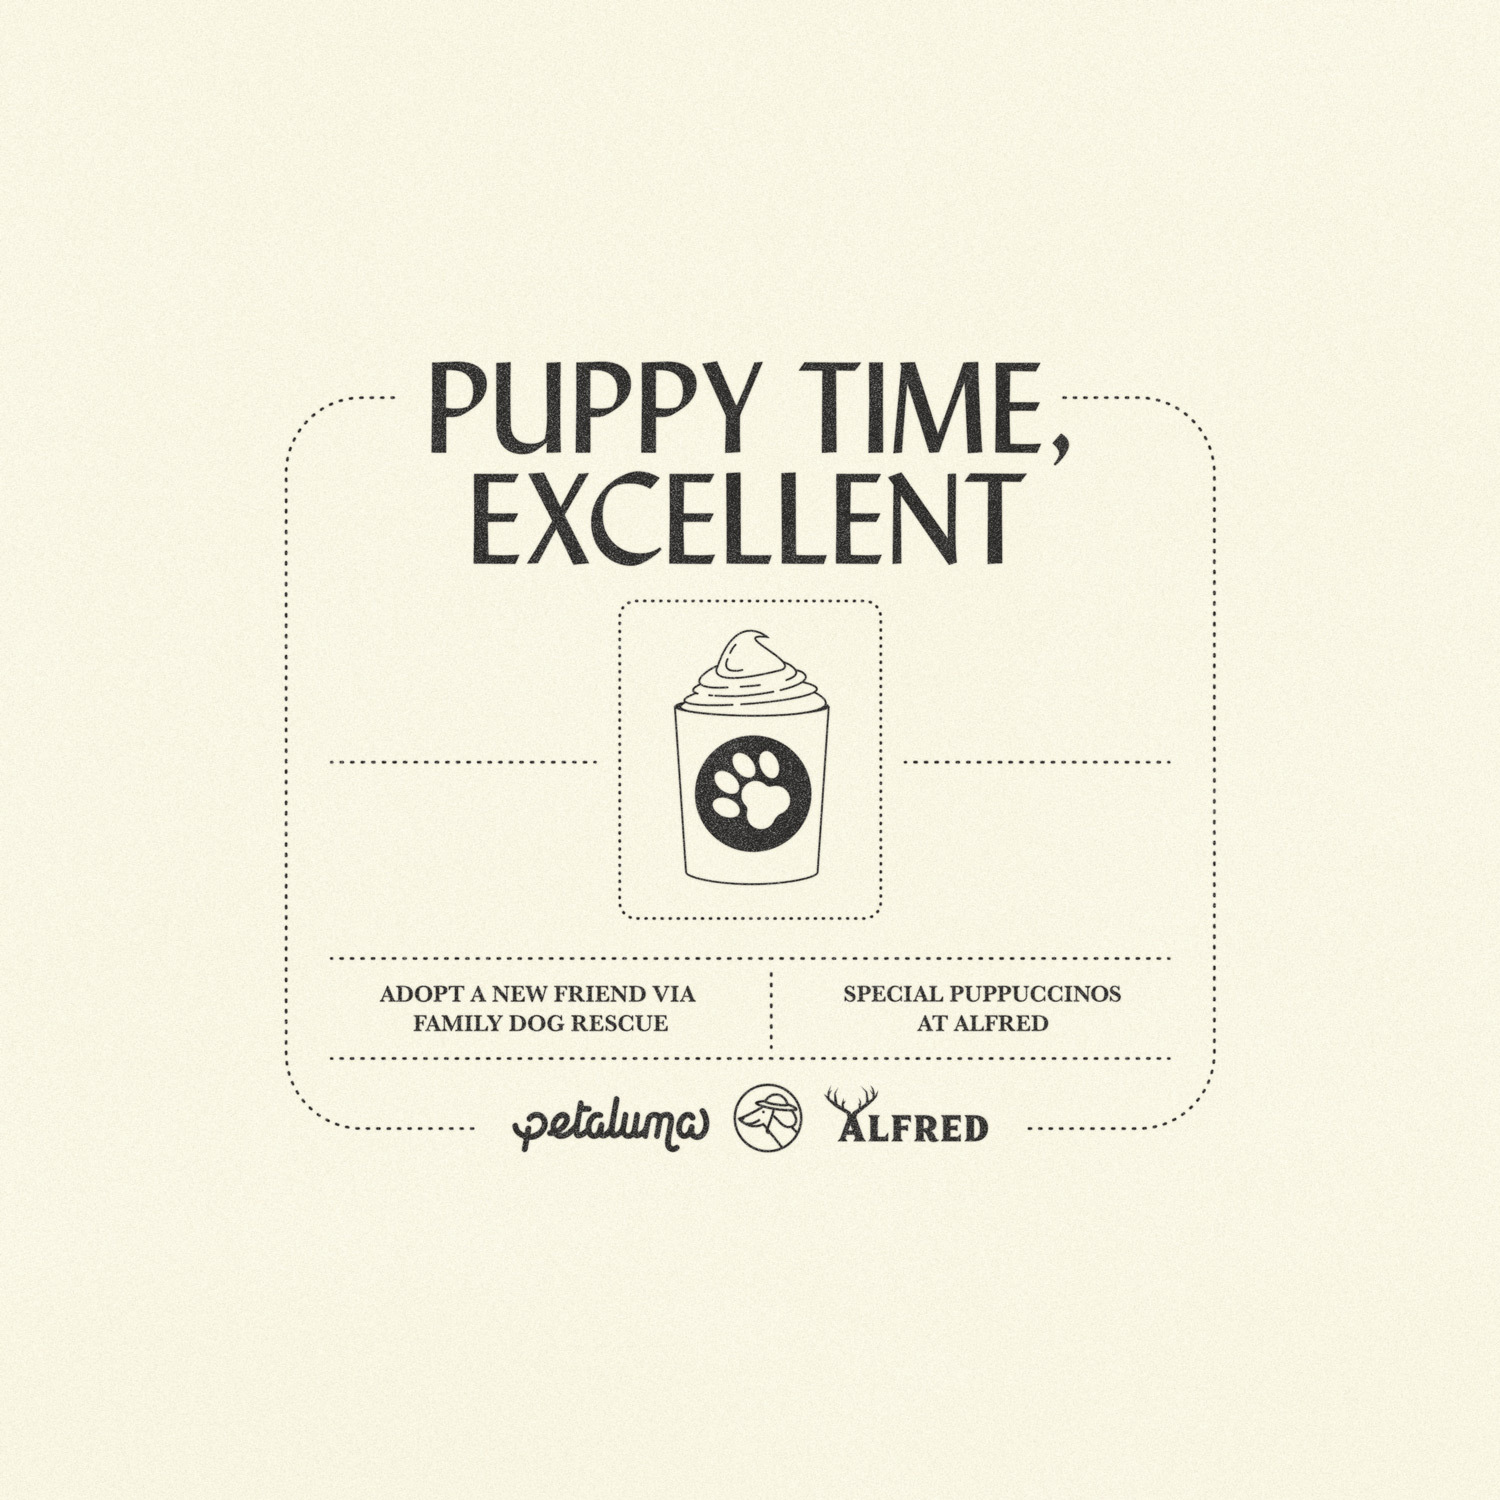 Brochure: 'Puppy Time, Excellent' with engaging text for a delightful canine experience.